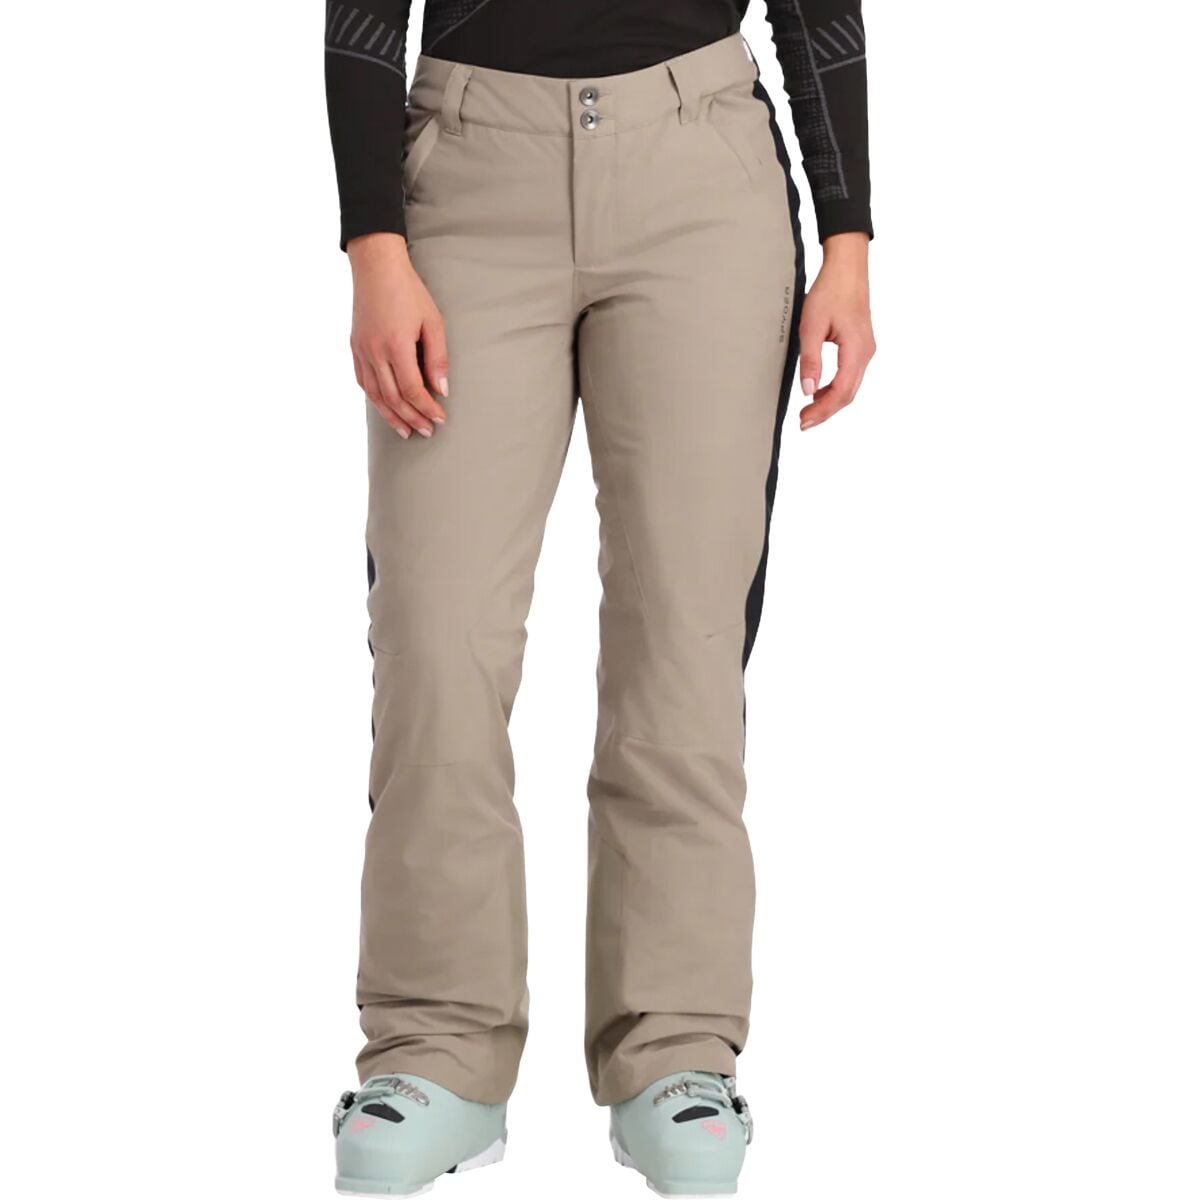 Spyder Hope Insulated Pant - Women's